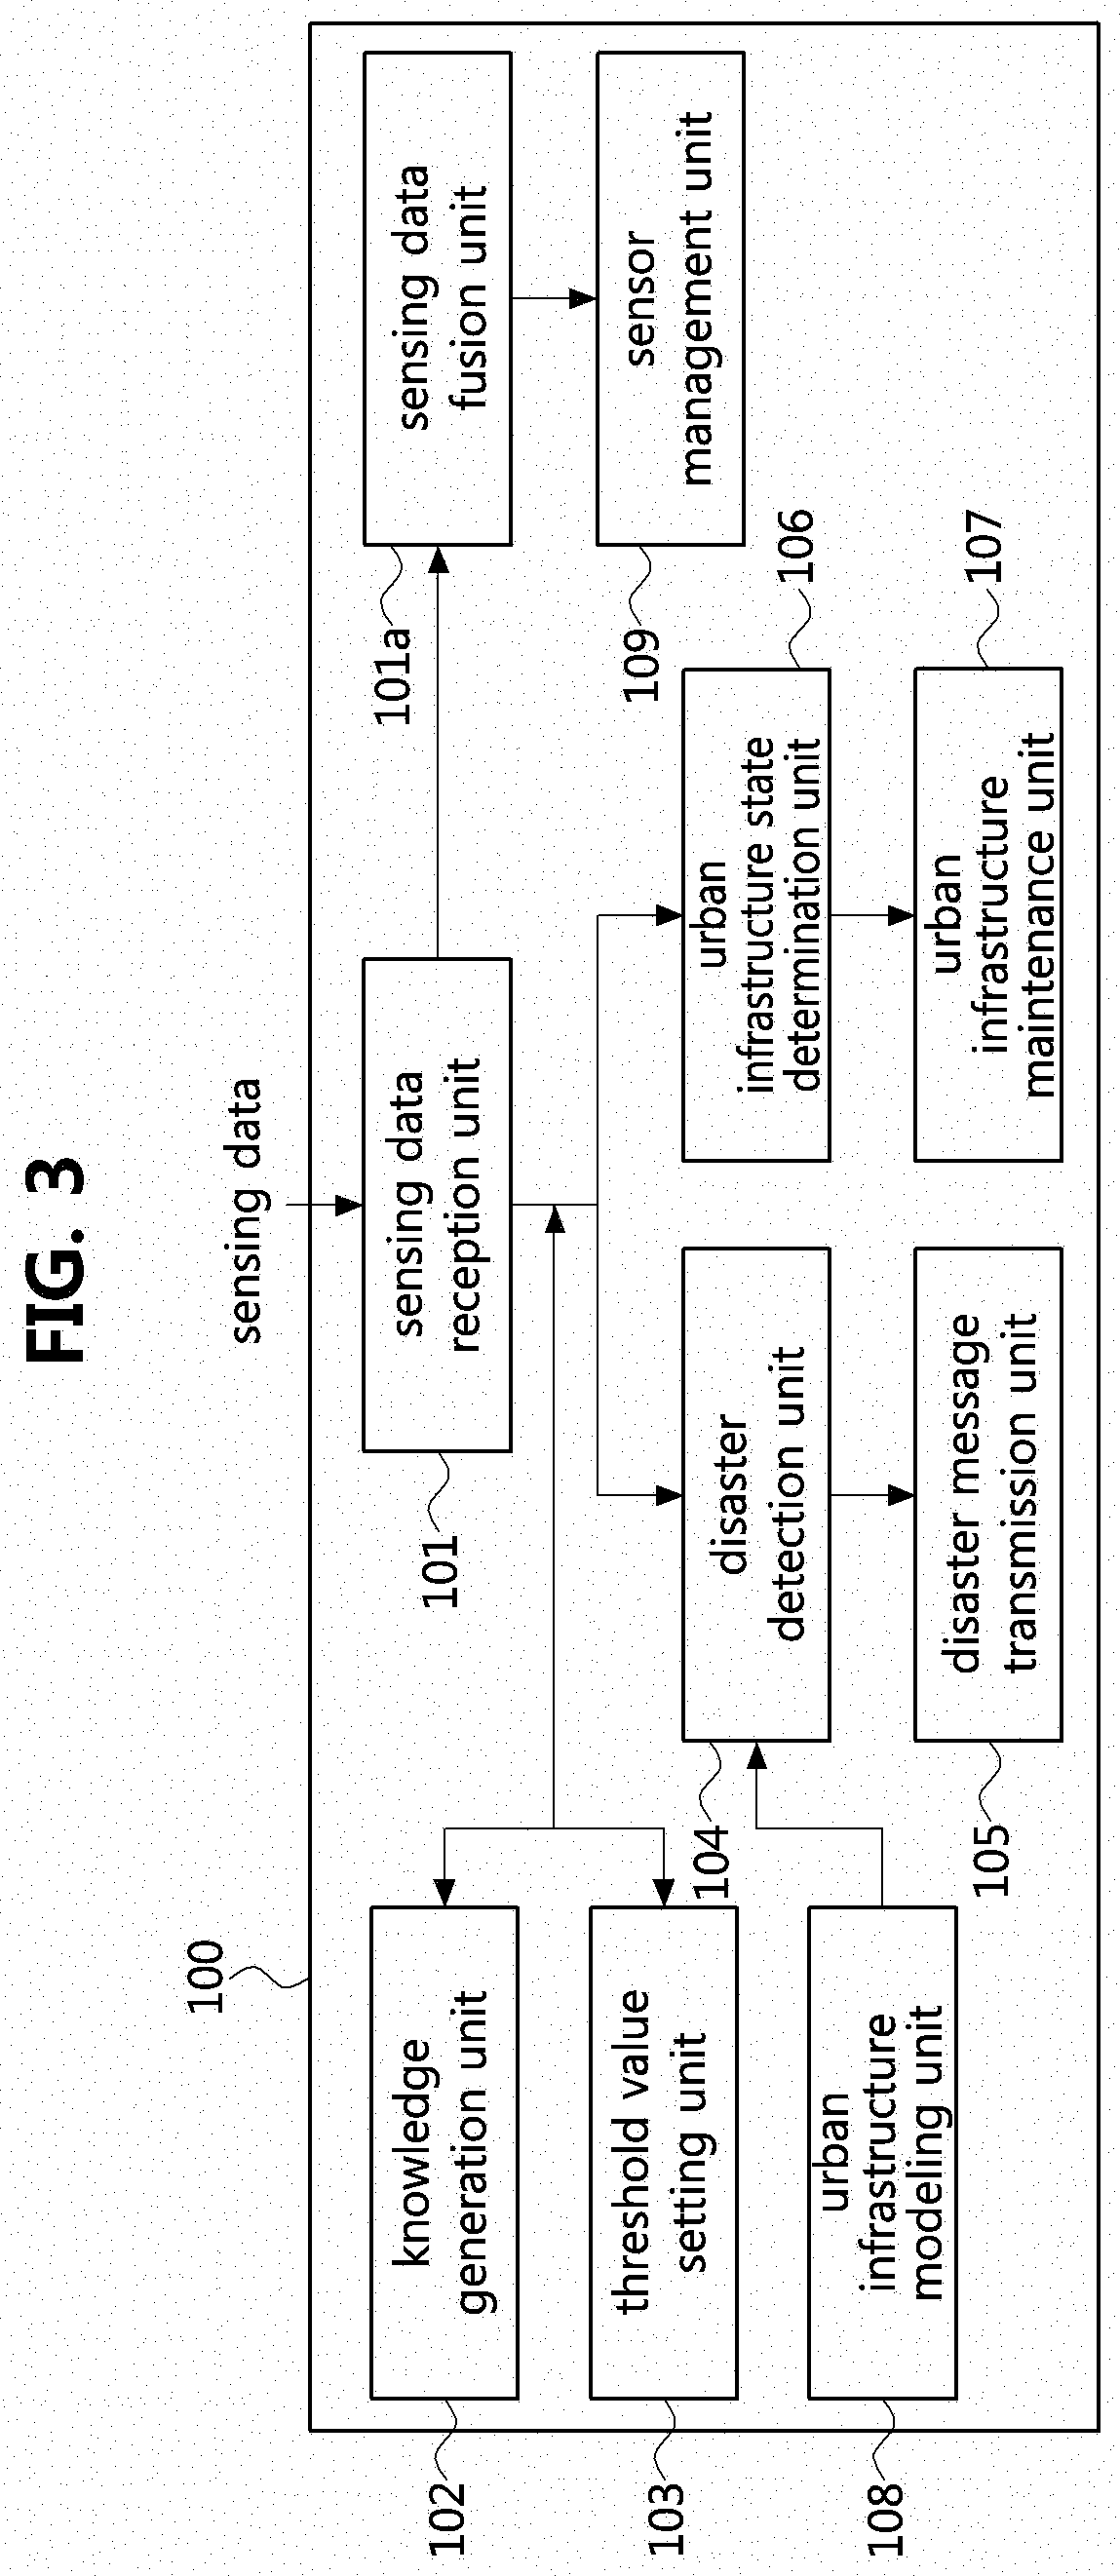 Method and apparatus for managing urban infrastructures using internet of things